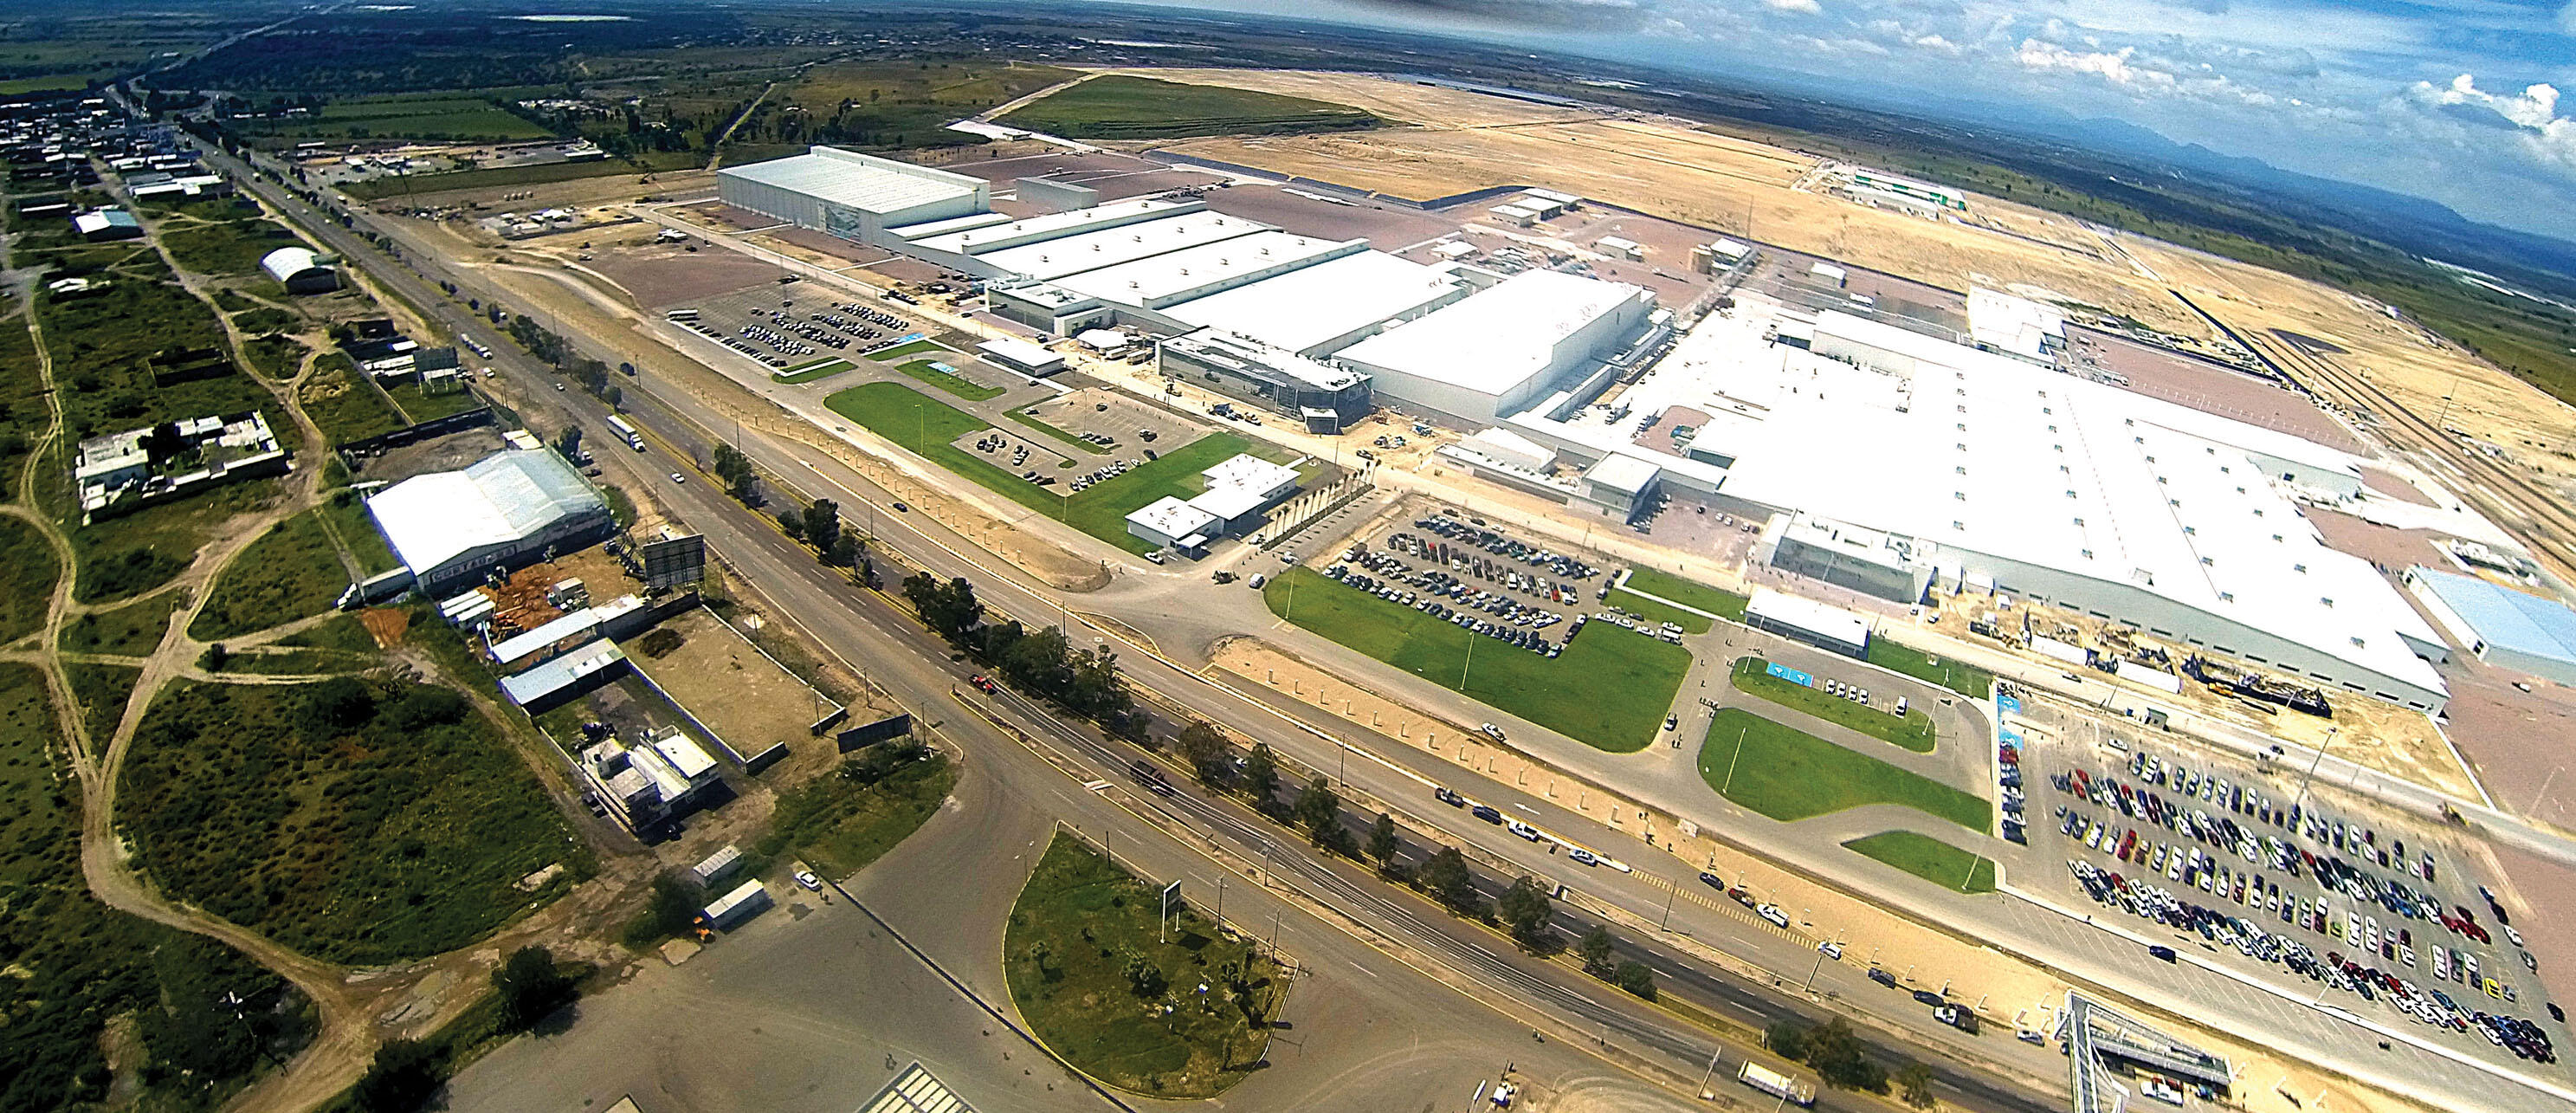 An aerial photograph of a sprawling Nissan facility in Aguascalientes, which will be joined by a Daimler-Benz plant in the open space behind it. (Photo courtesy of and © Nissan Motor Corporation.)